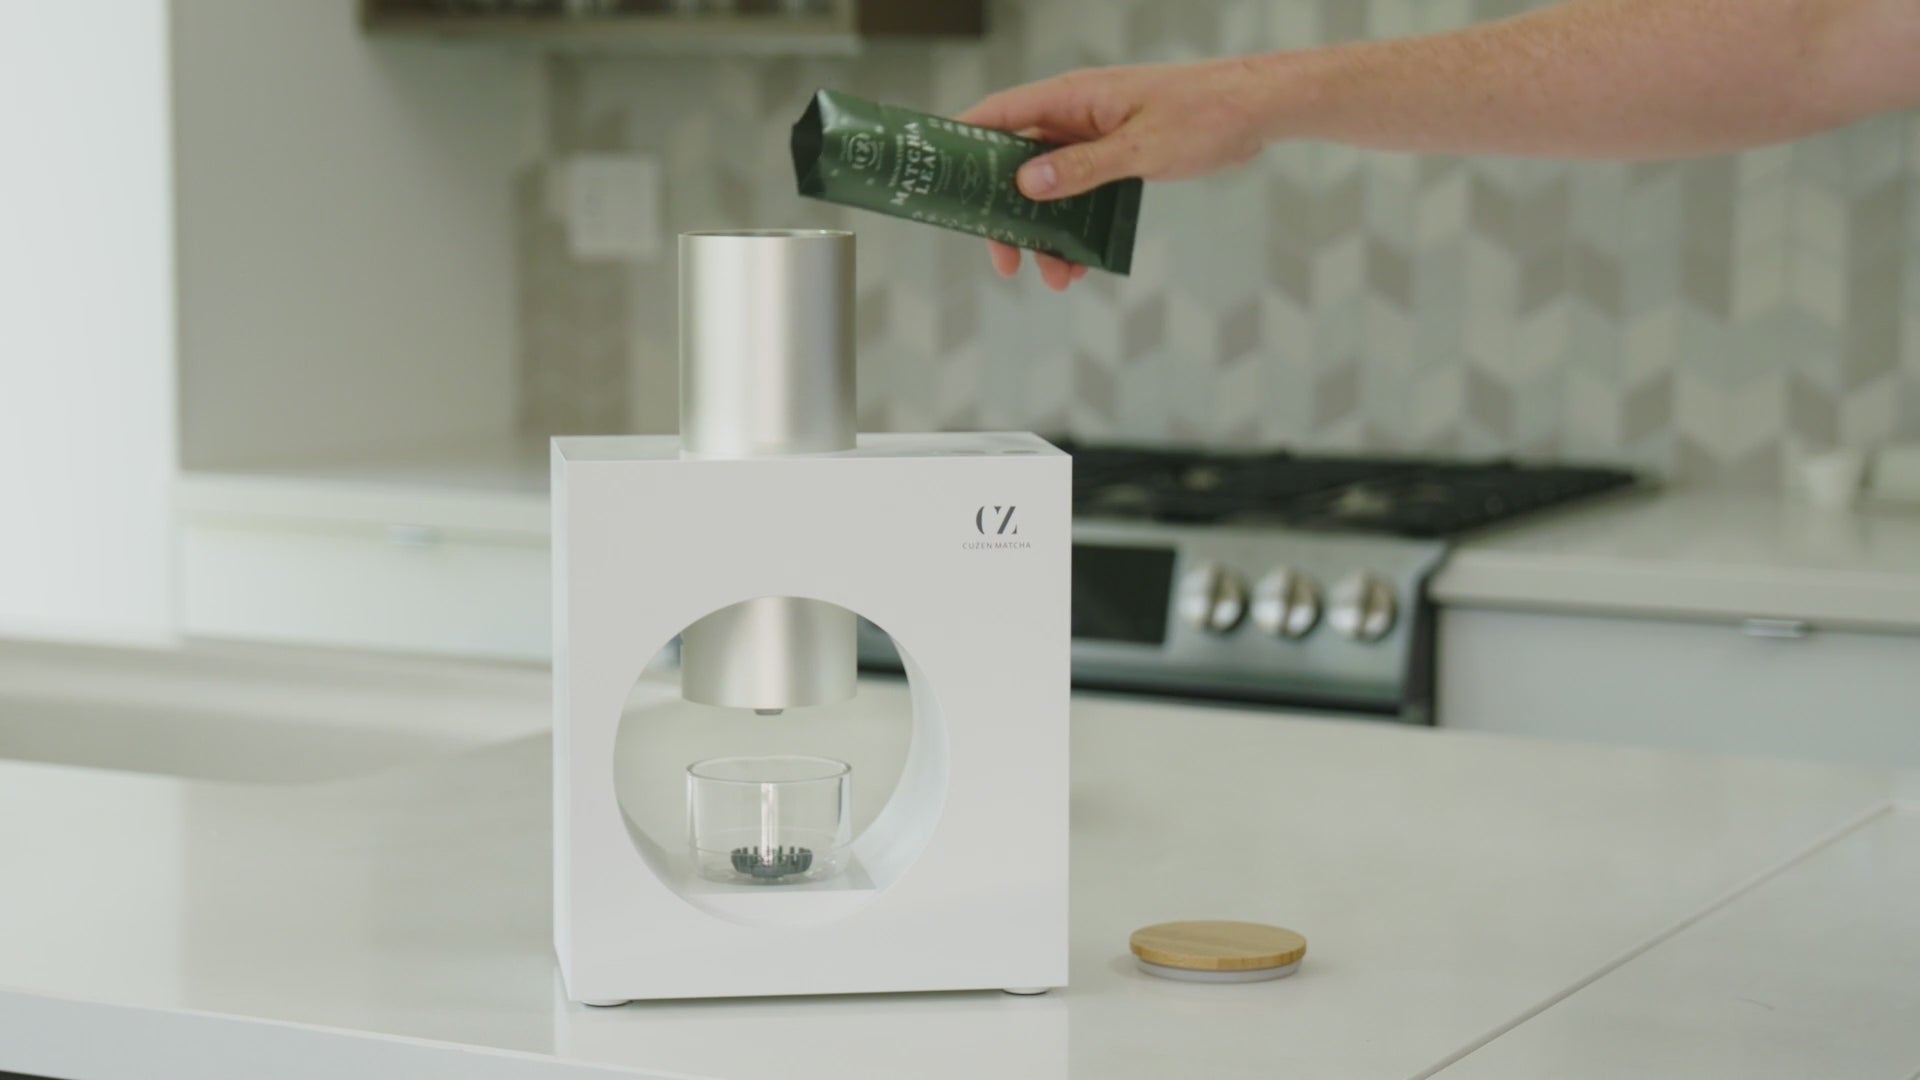 The video poster for a clip demonstrating how to use the Matcha Maker.